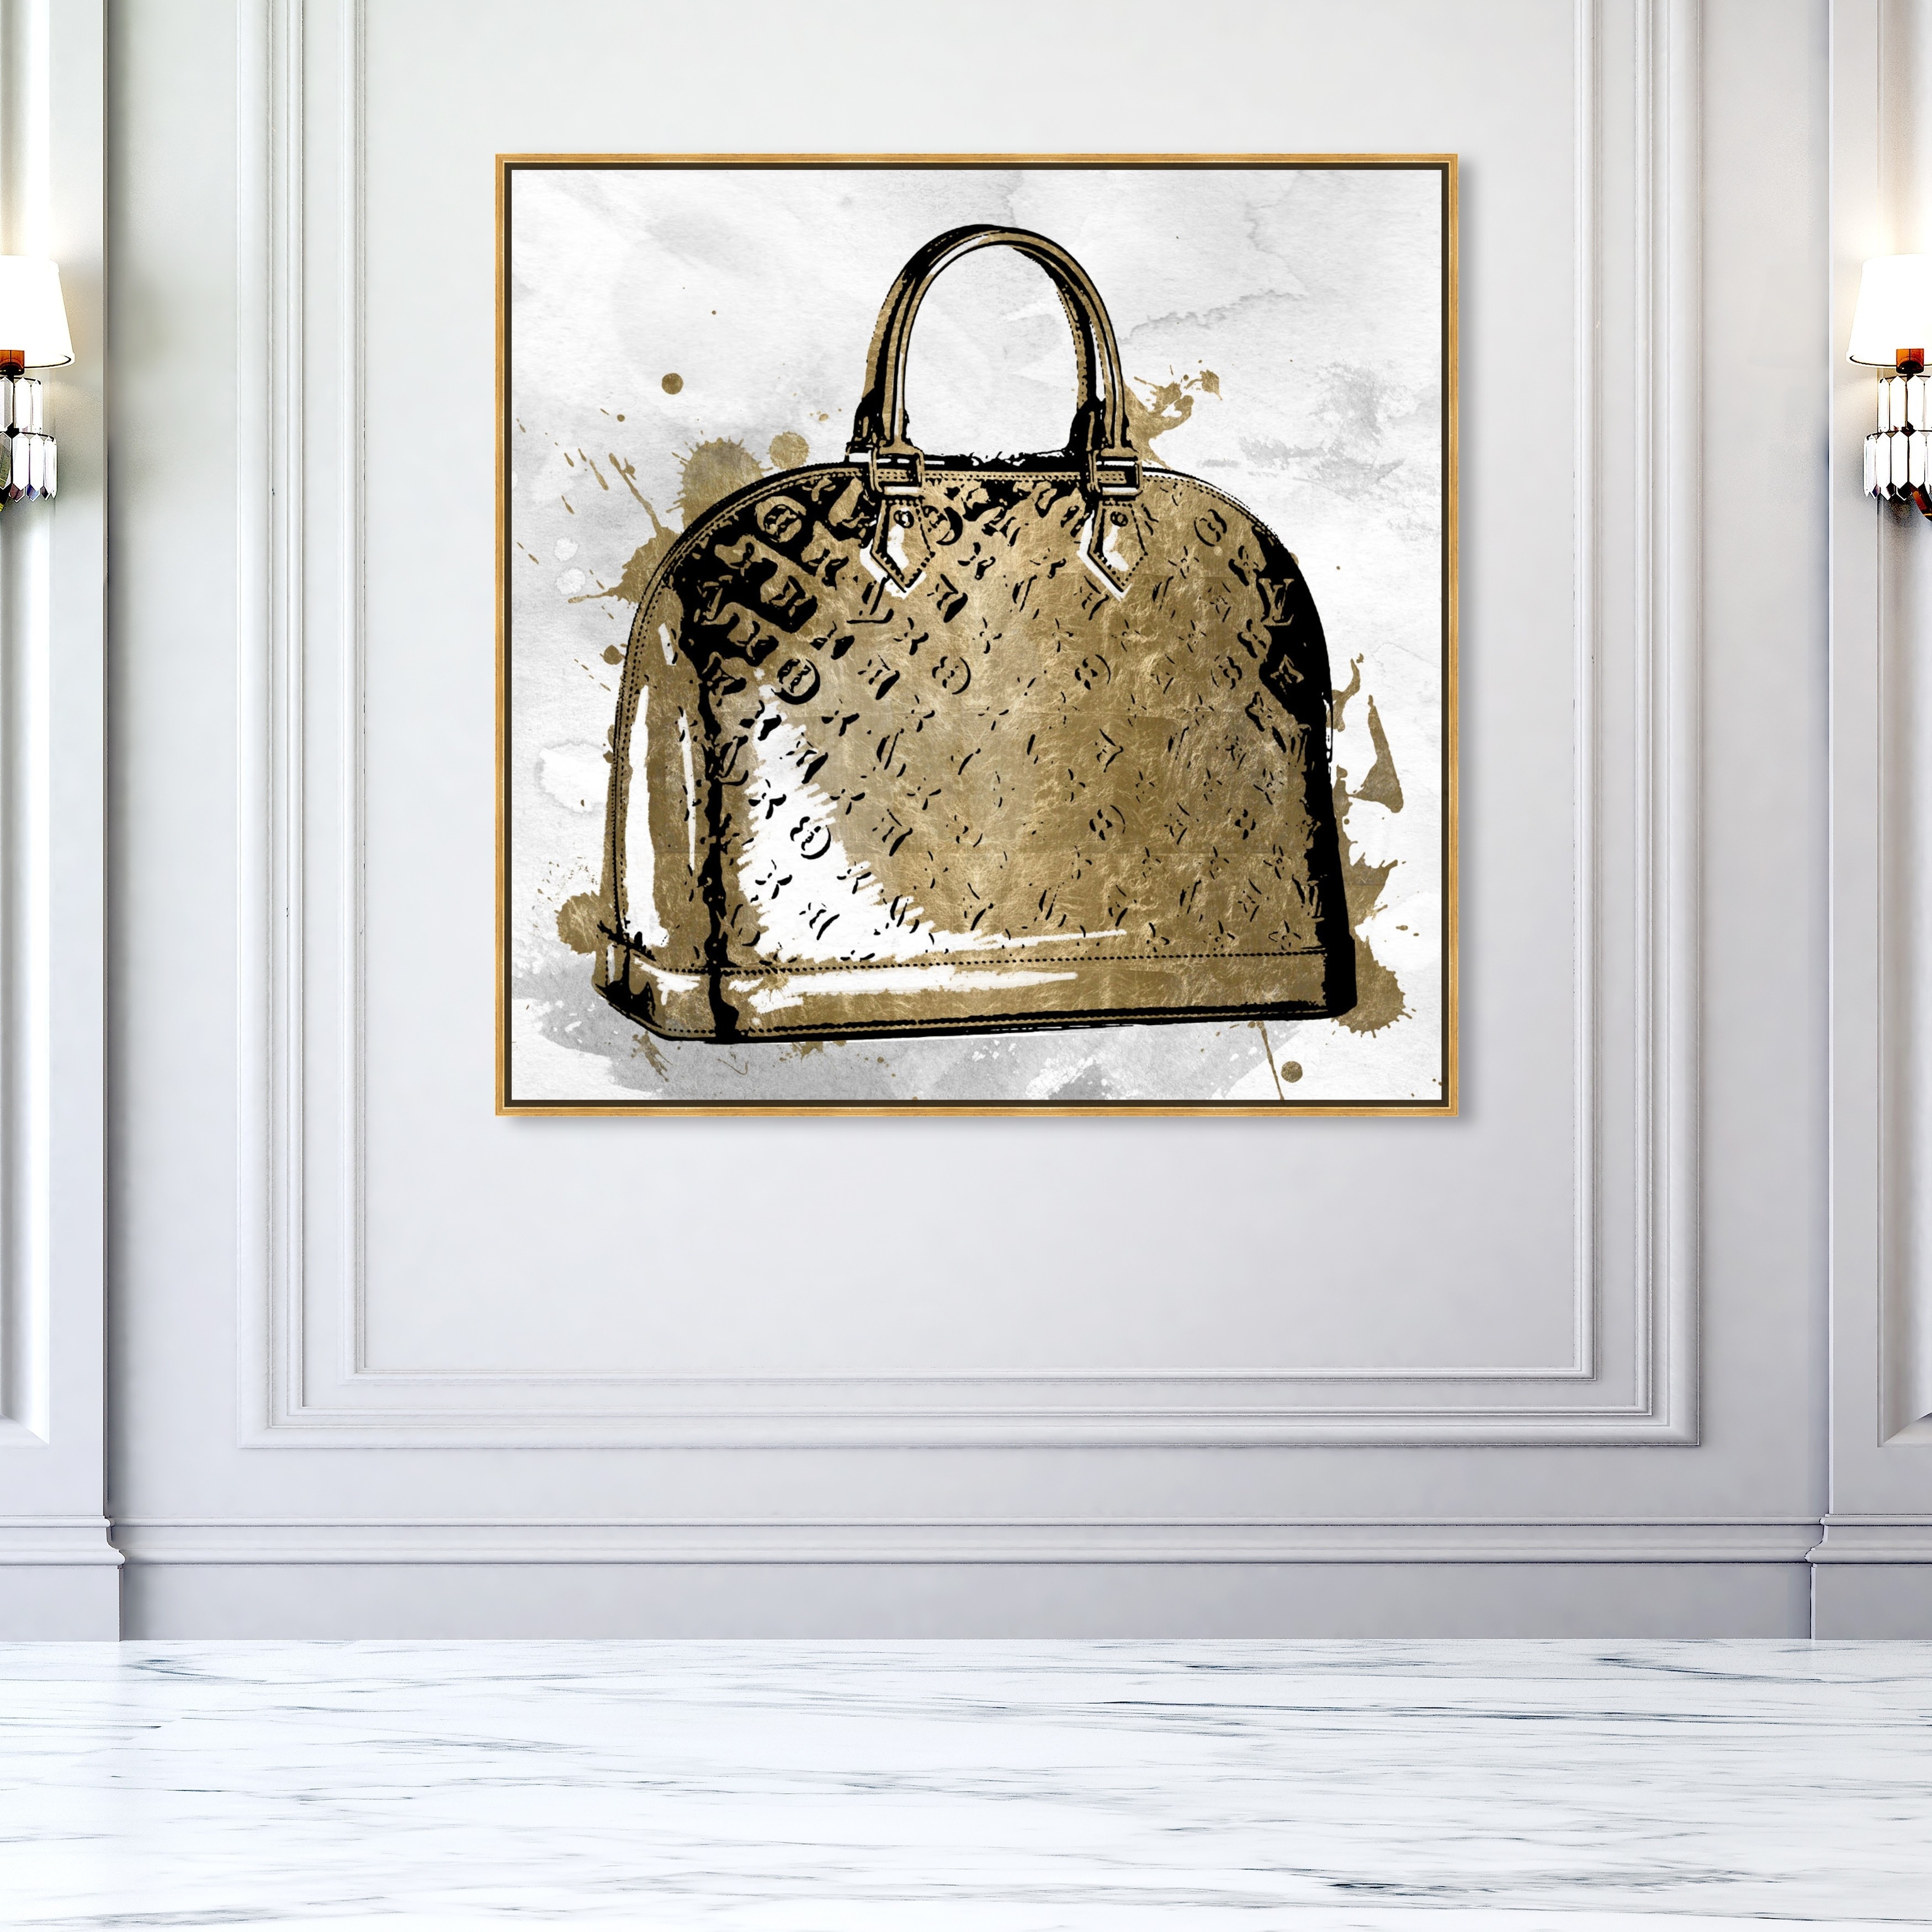 Oliver Gal 'LV Gold' Fashion and Glam Wall Art Framed Canvas Print Handbags  - Gold, White - On Sale - Bed Bath & Beyond - 31794545